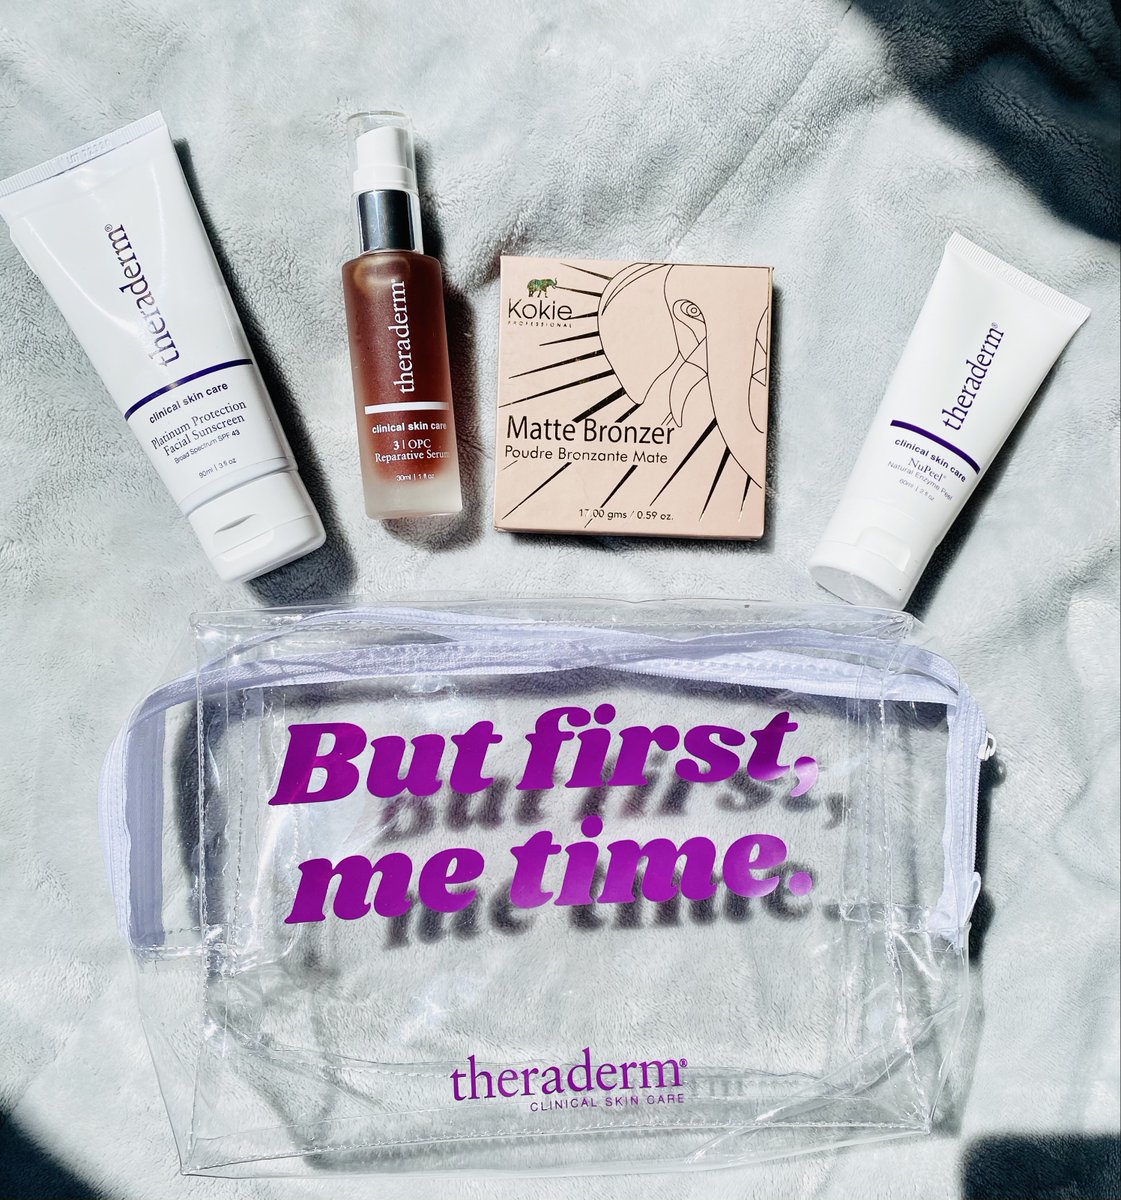 Treat mom with our Spring Skin Bundle for Mother’s Day! She’ll get our #fanfavorite Platinum Protection Sunscreen, award-winning OPC Serum, NuPeel, @KokieCosmetics bronzer & a lovely travel case. SHOP ow.ly/tcrk50EGyLn 💜 #MothersDaygifts #skincareformom #TheradermClinical